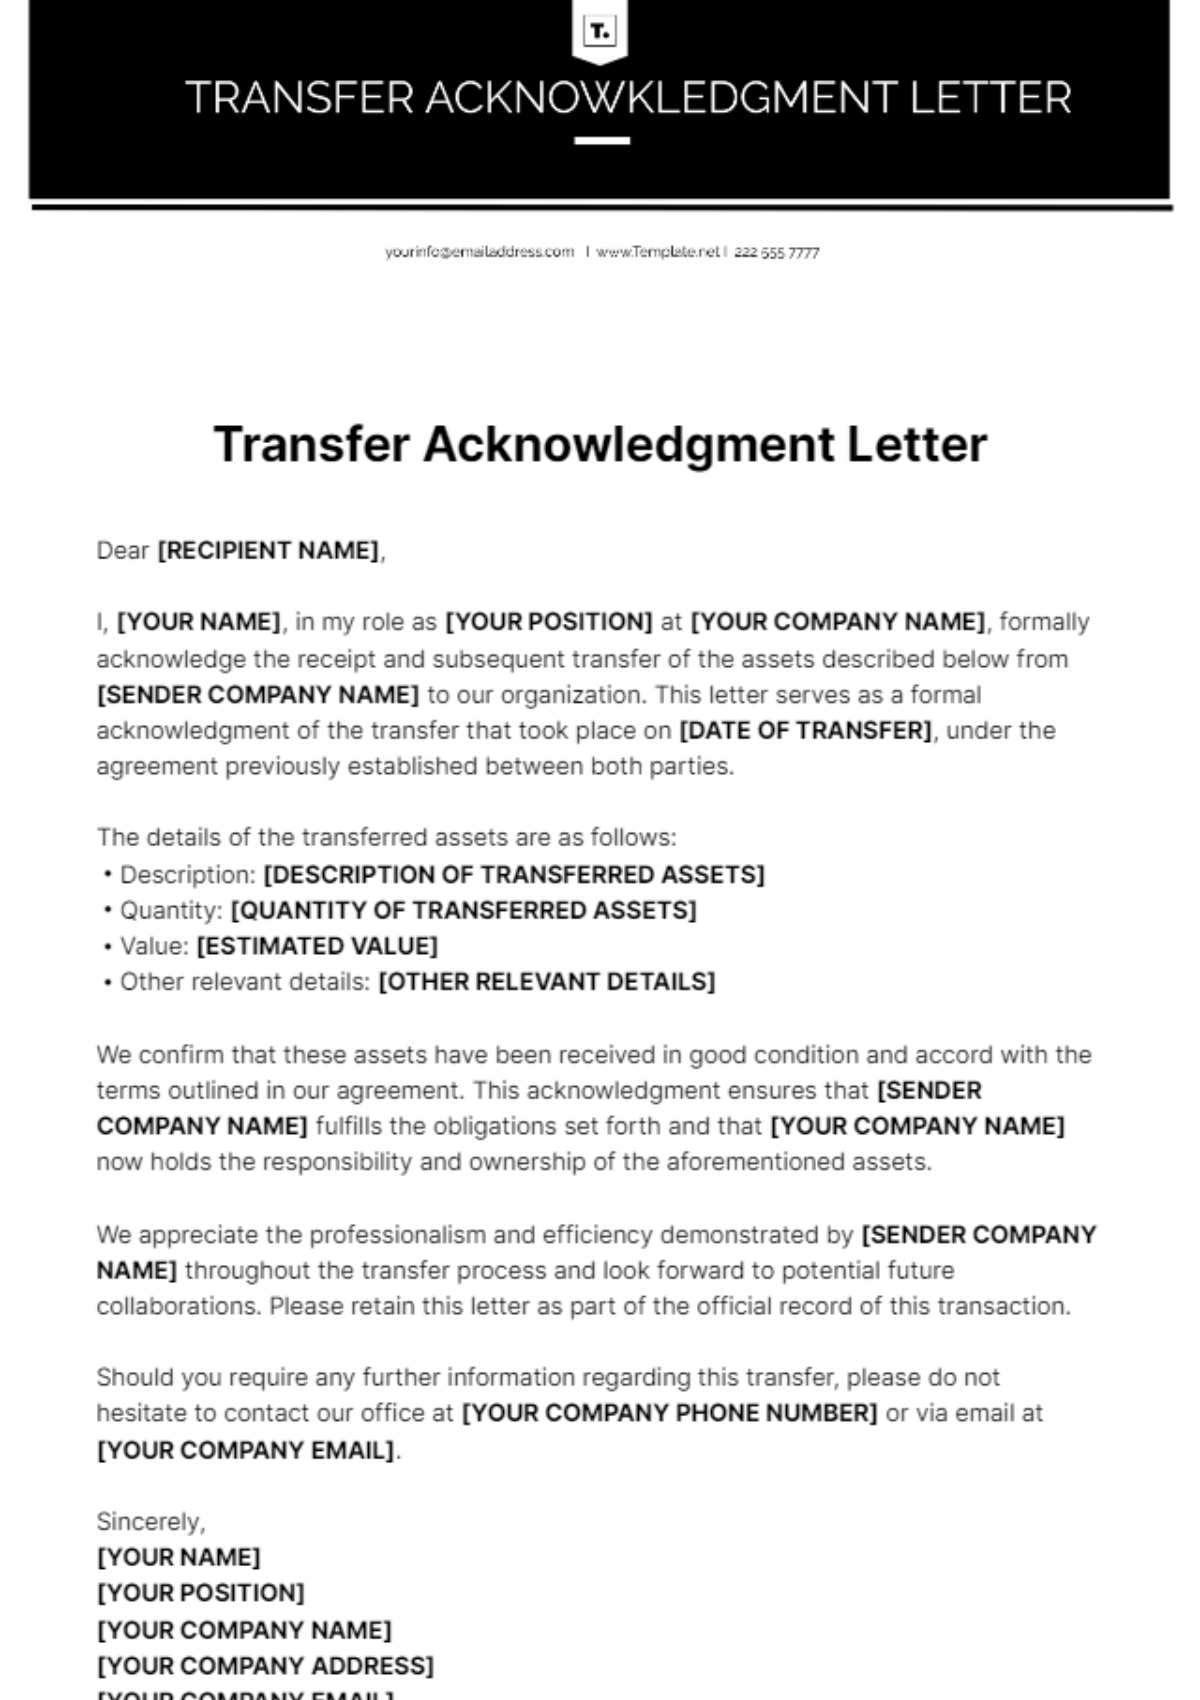 Transfer Acknowledgment Letter Template